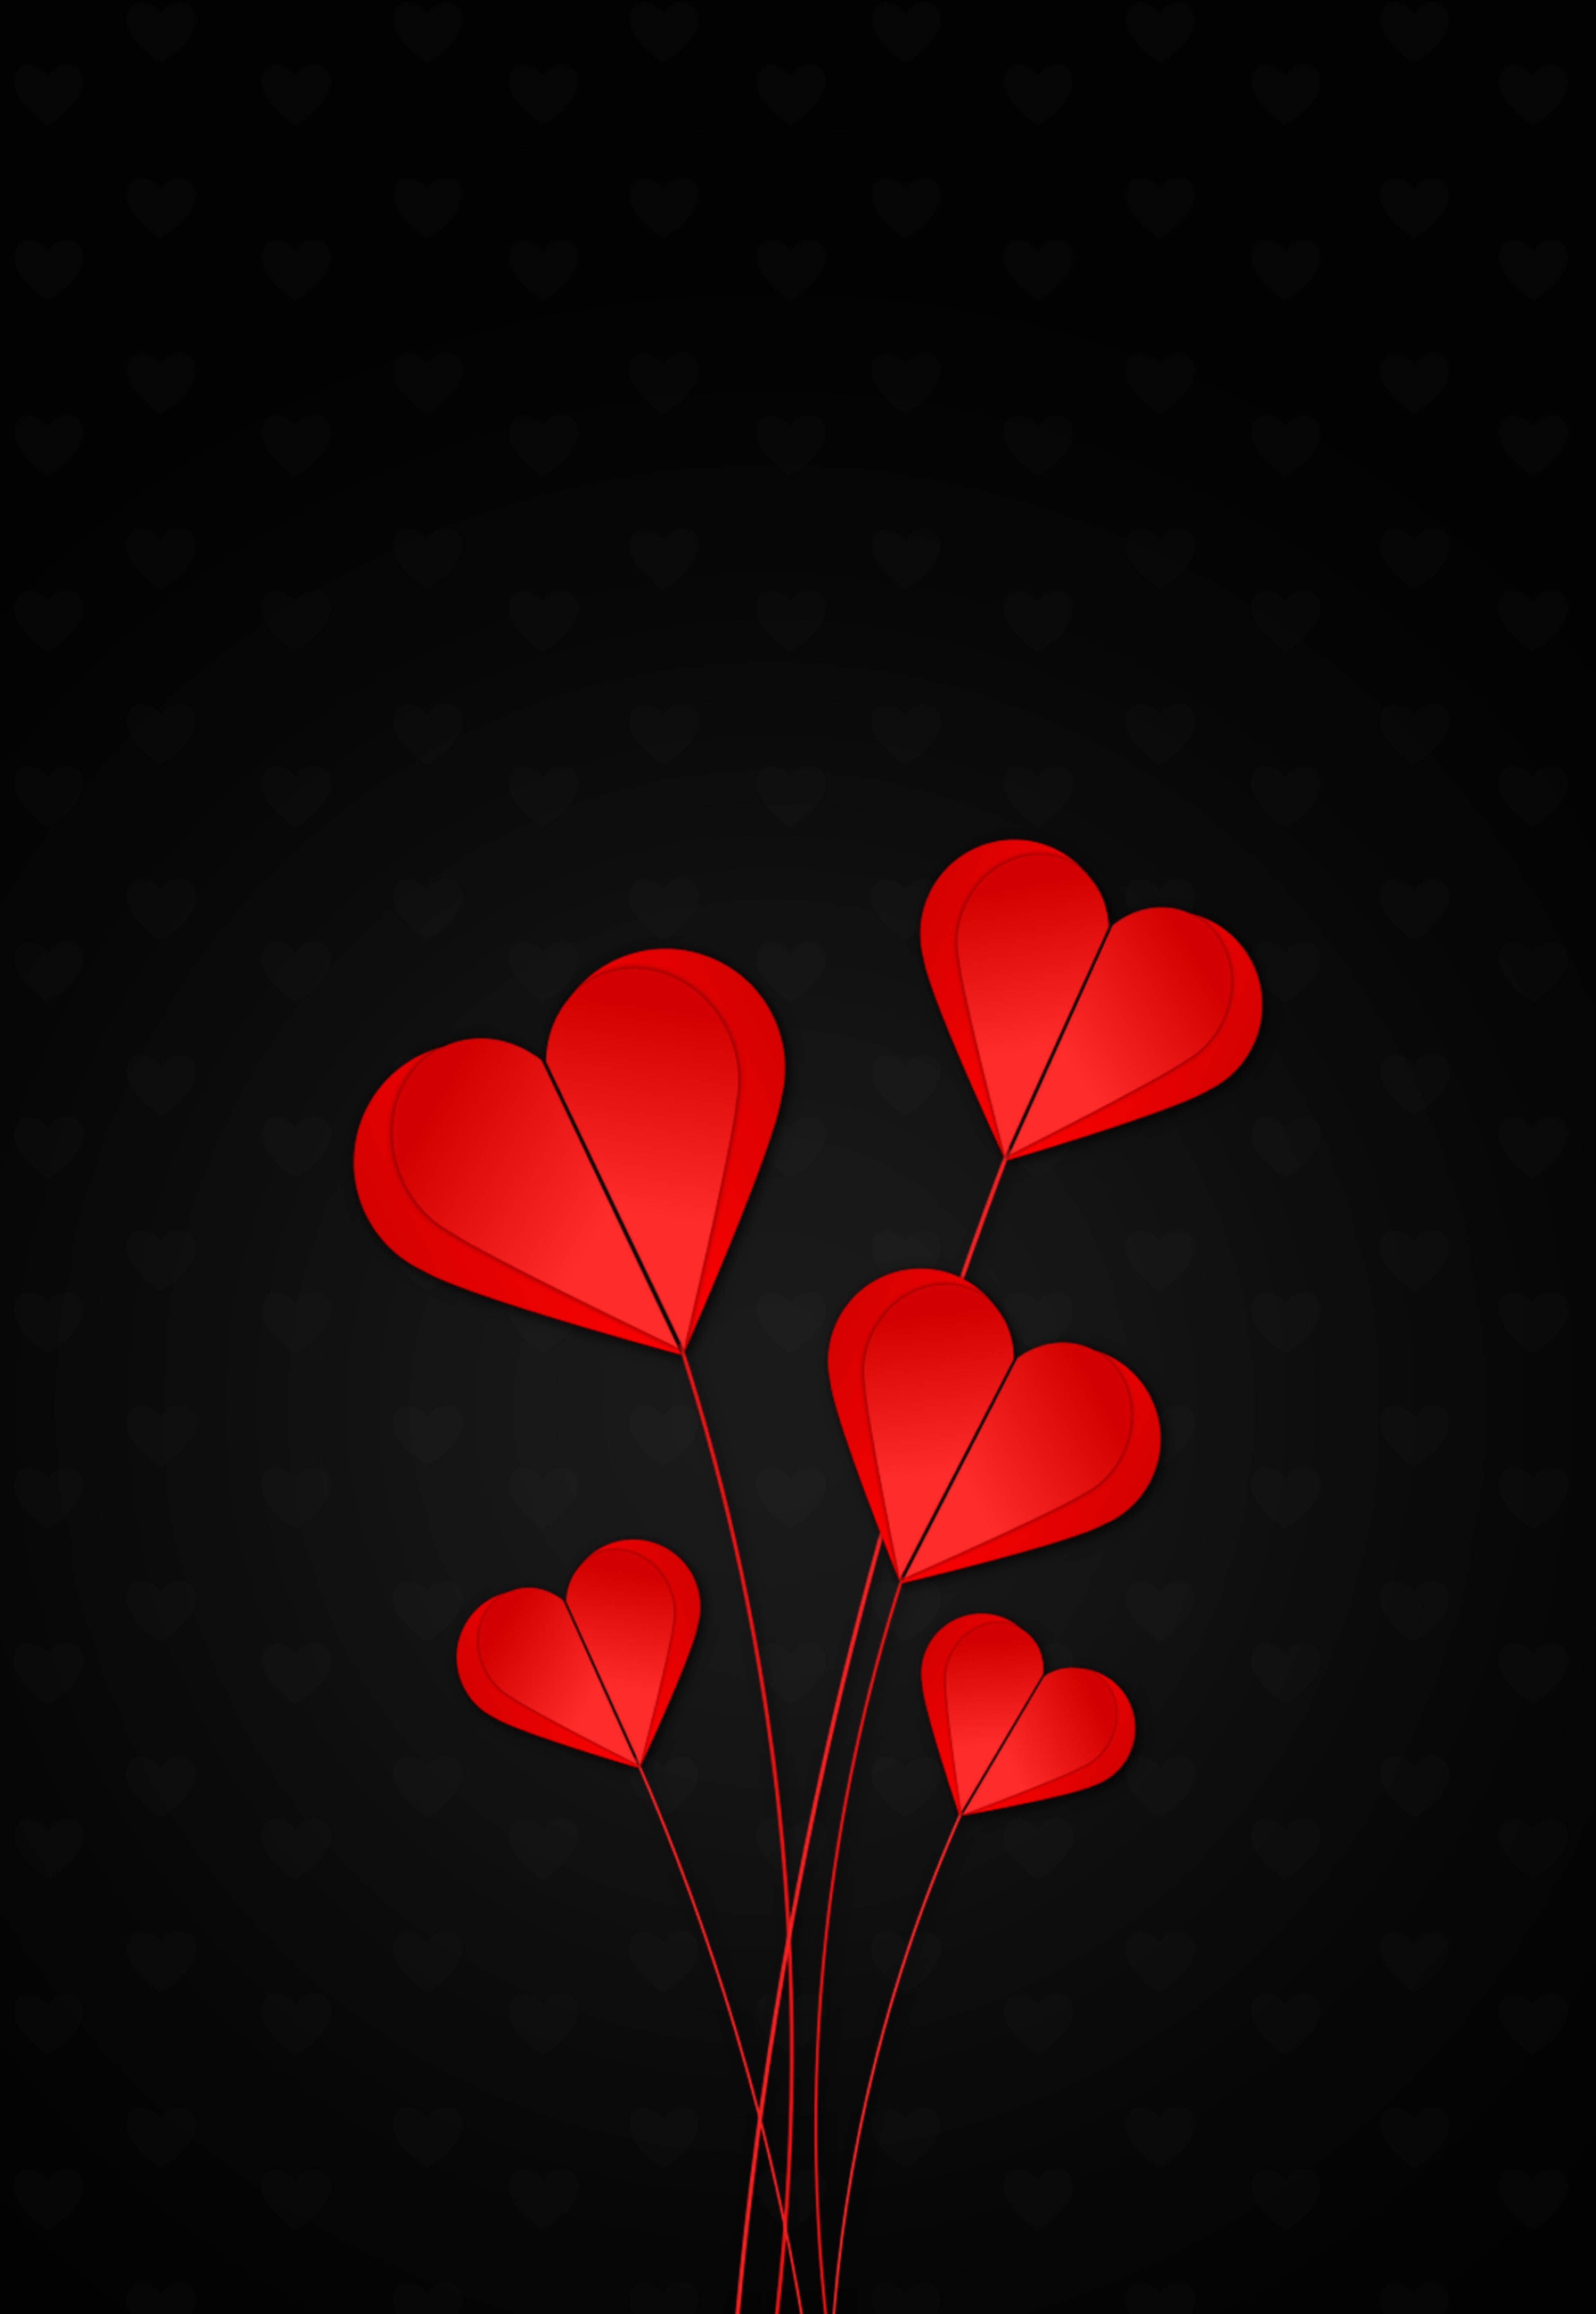 hearts, black background, love, red